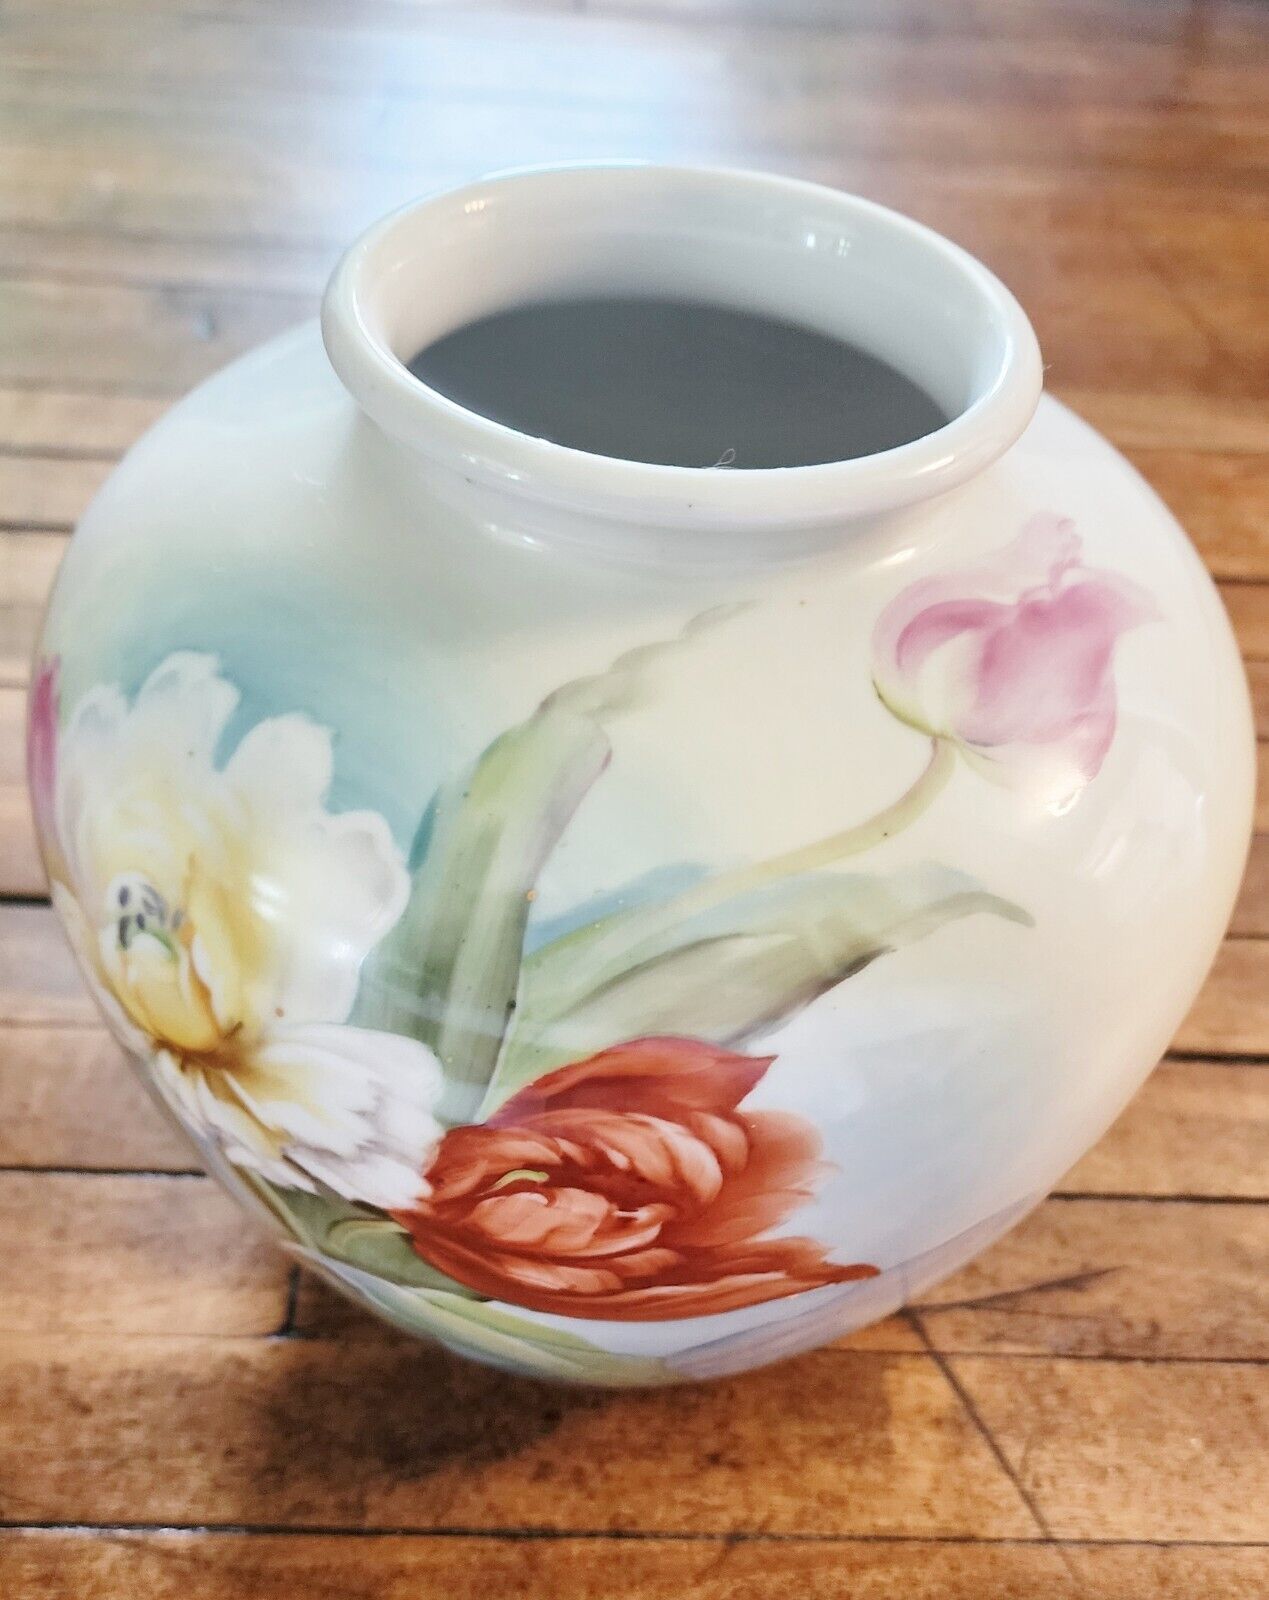 Beautiful 8 Inch Hand Painted Floral Vase ROSE CHINA JAPAN Has Signature